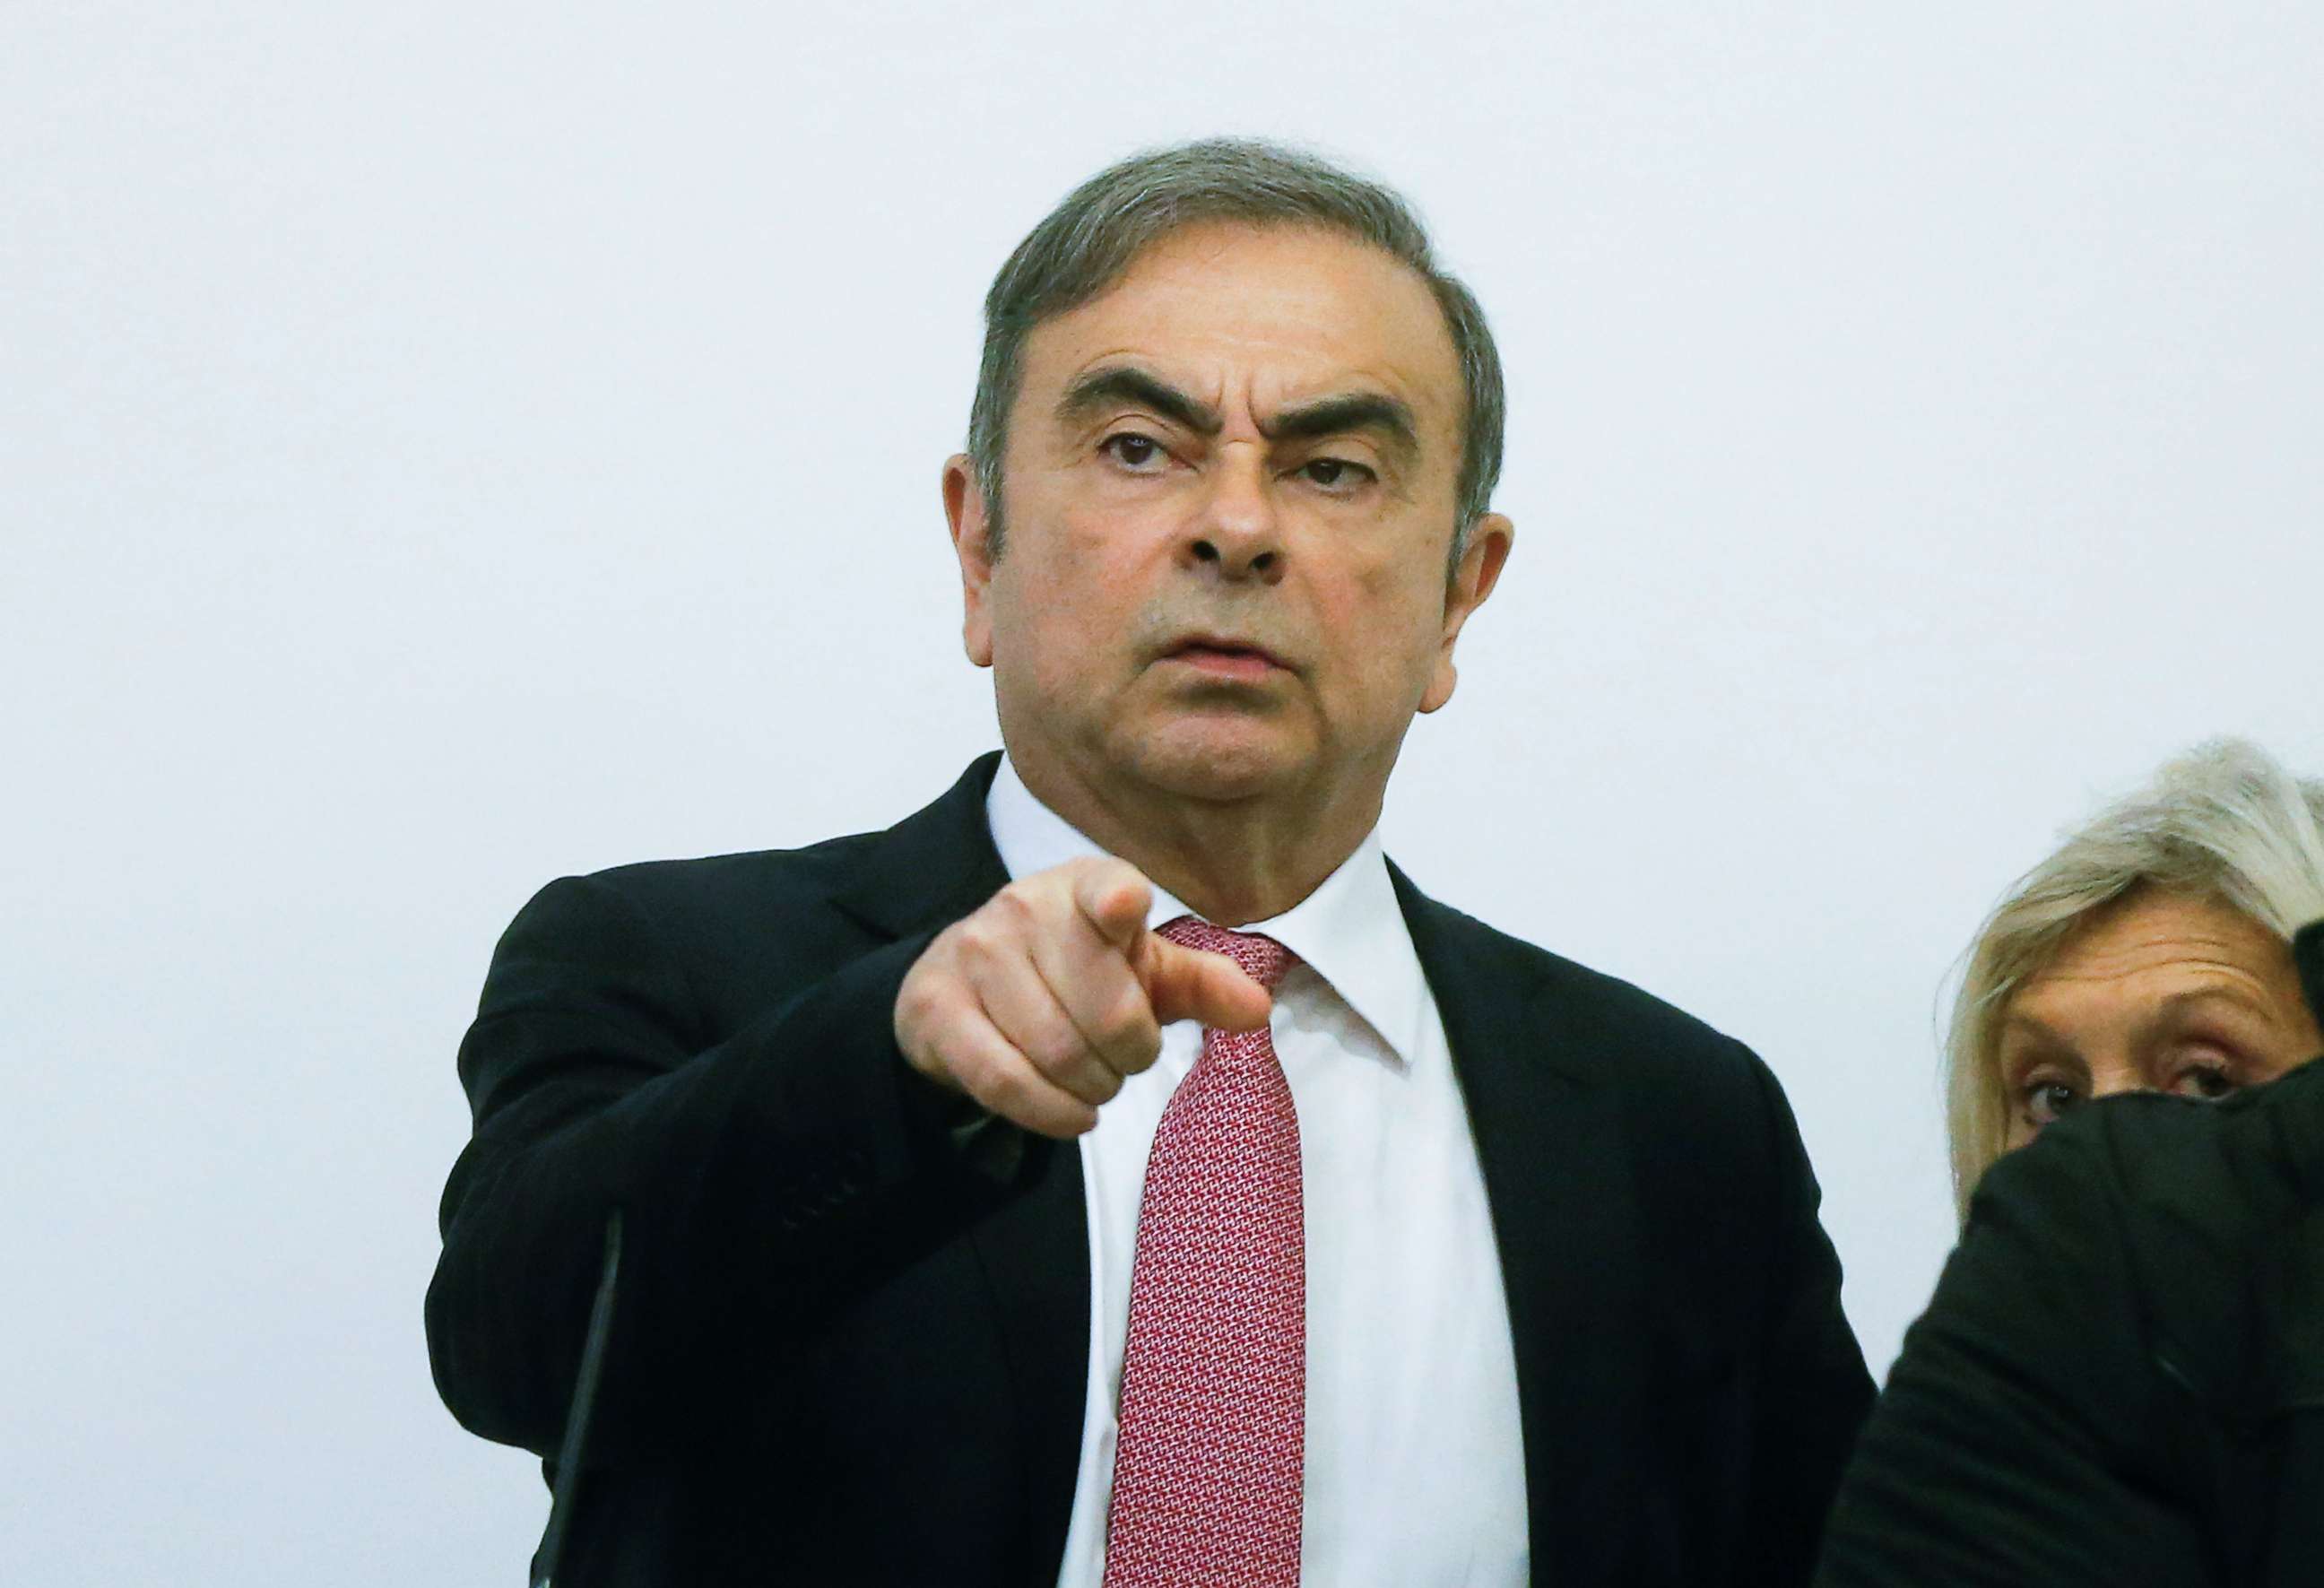 PHOTO: Former Nissan chairman Carlos Ghosn gestures during a news conference at the Lebanese Press Syndicate in Beirut, Lebanon, Jan. 8, 2020.